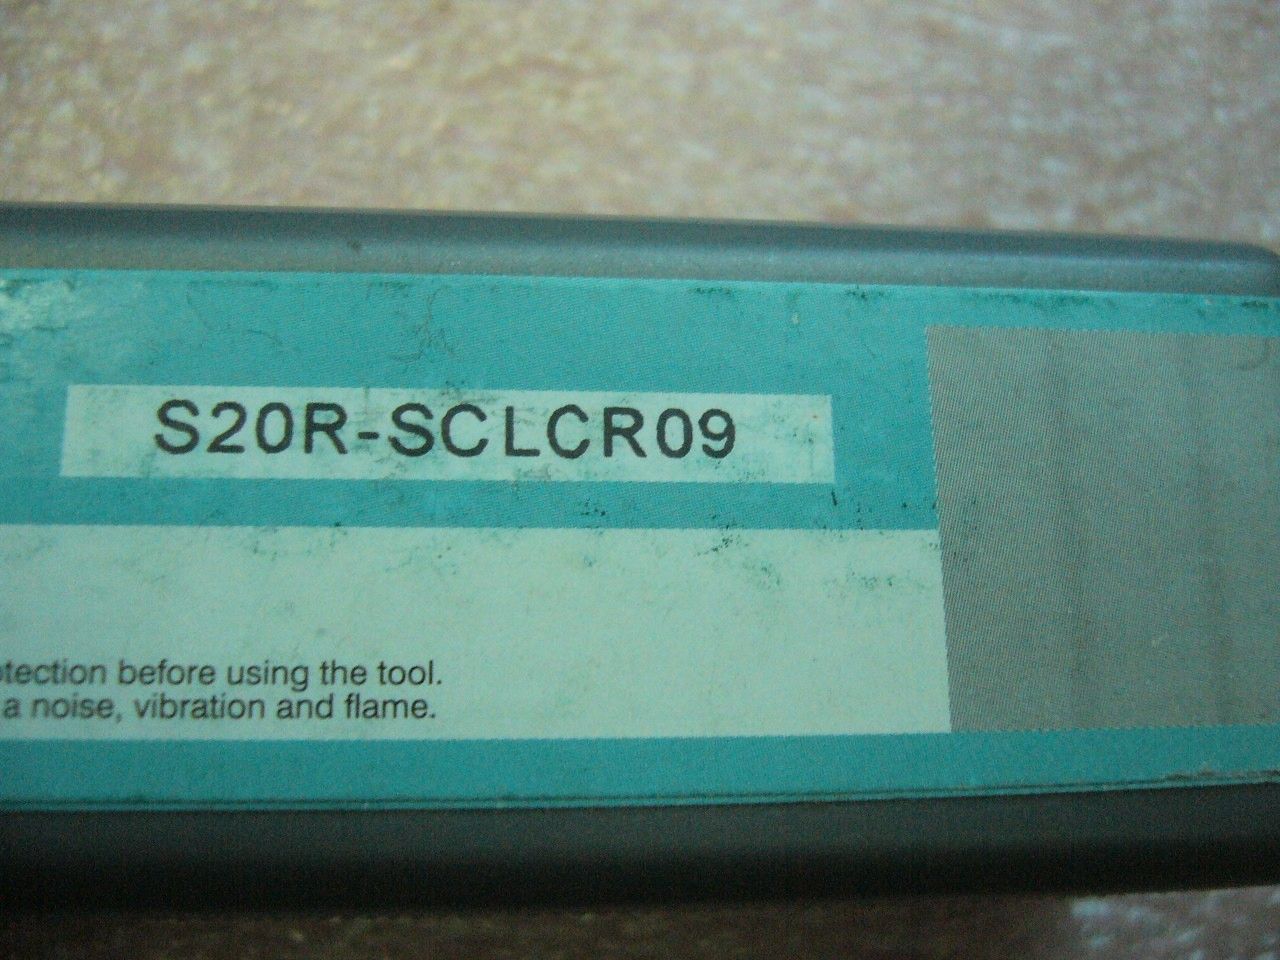 Boring Toolholder S20R-SCLCR09 for inserts CCMT09T3.. CCMT32.5...